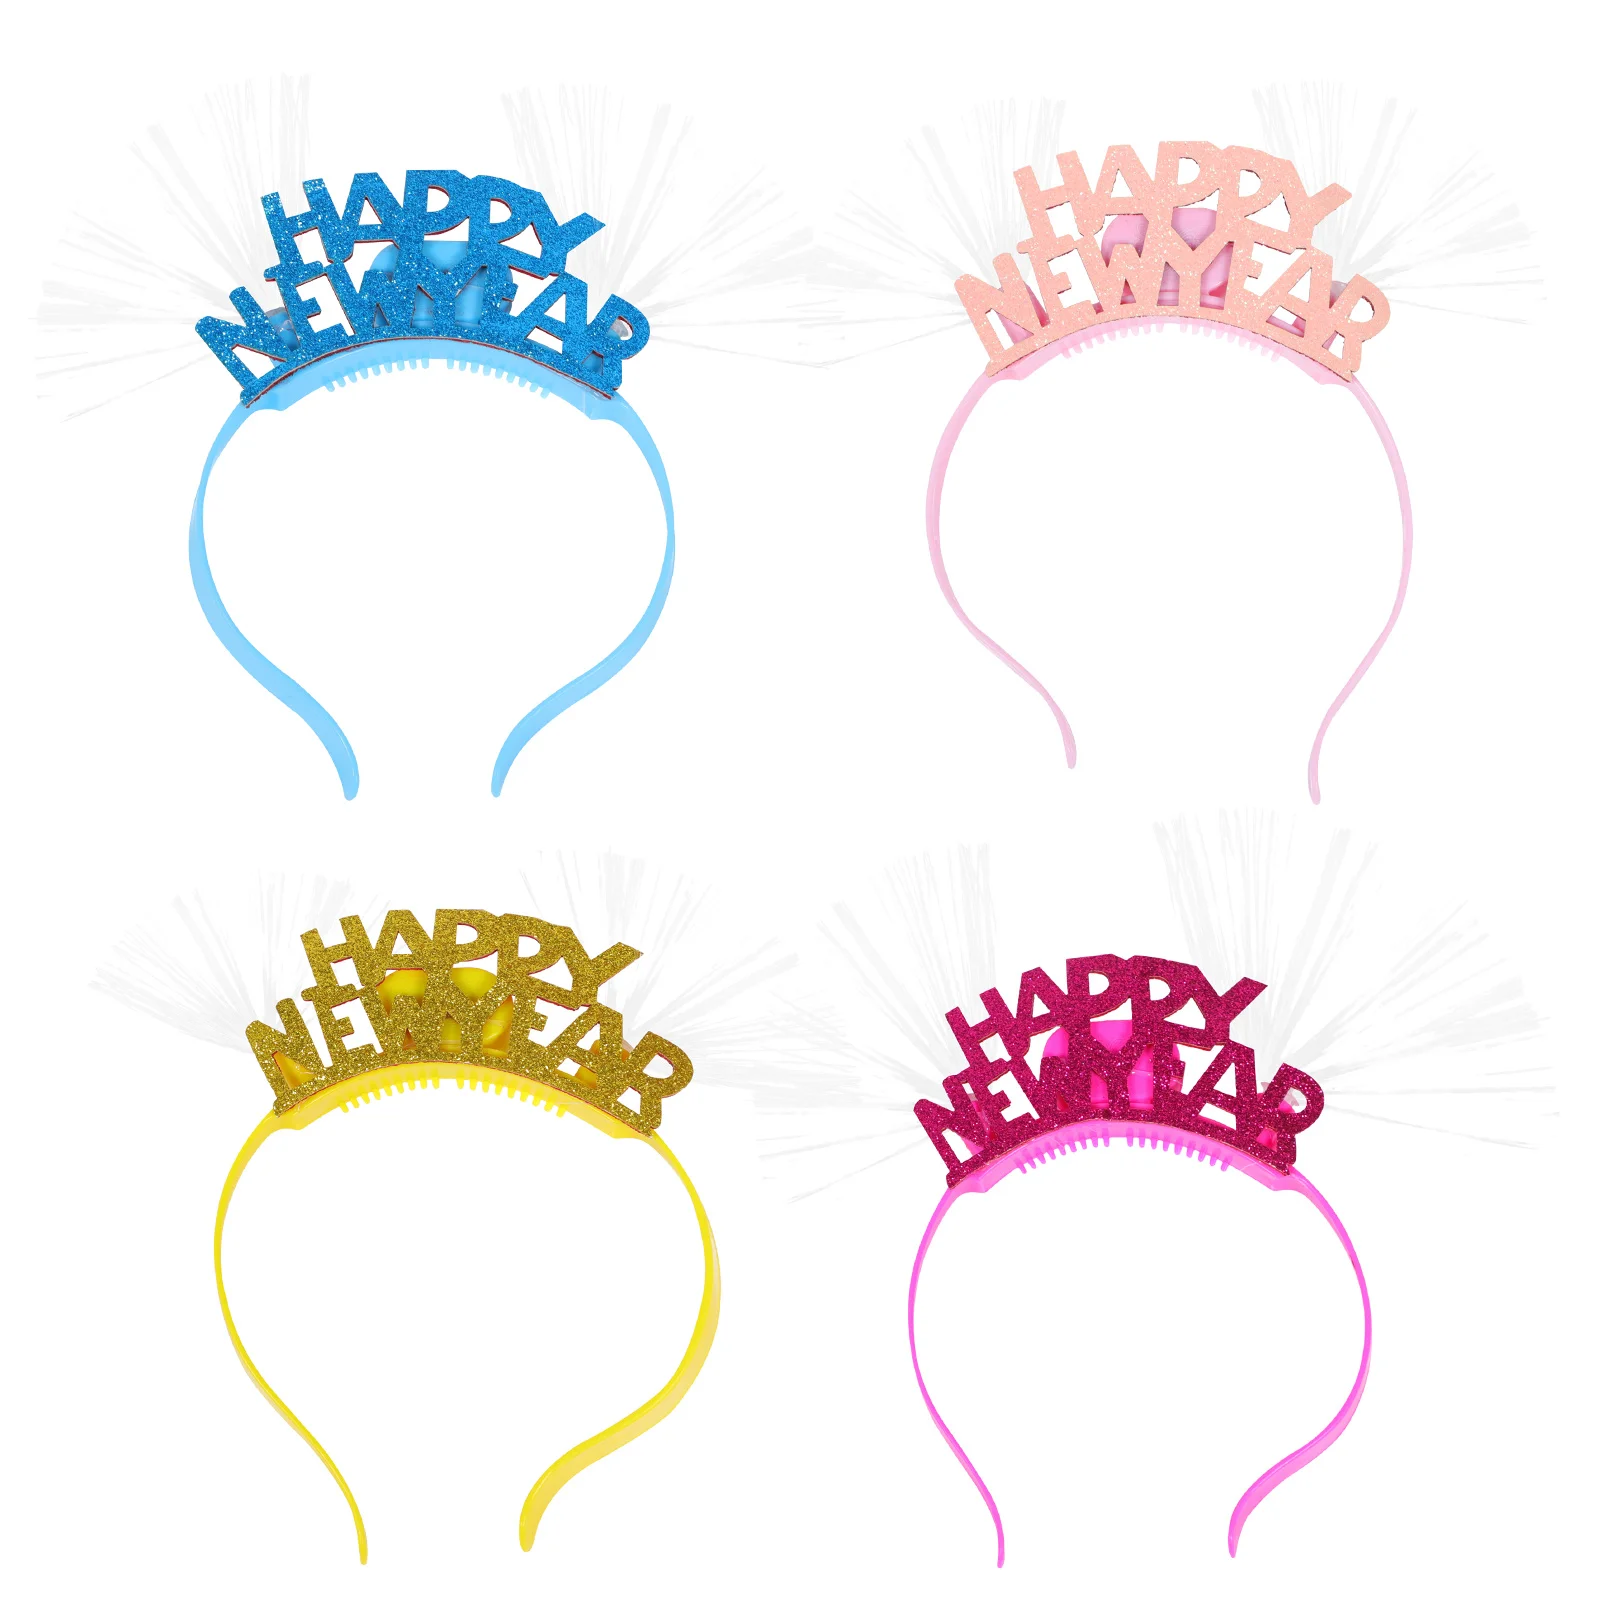 

Happy New Year Headband Tiara Light Up Glowing Headbands Fiber Optic Led Boppers Hair Band 2023 New Years Eve Party